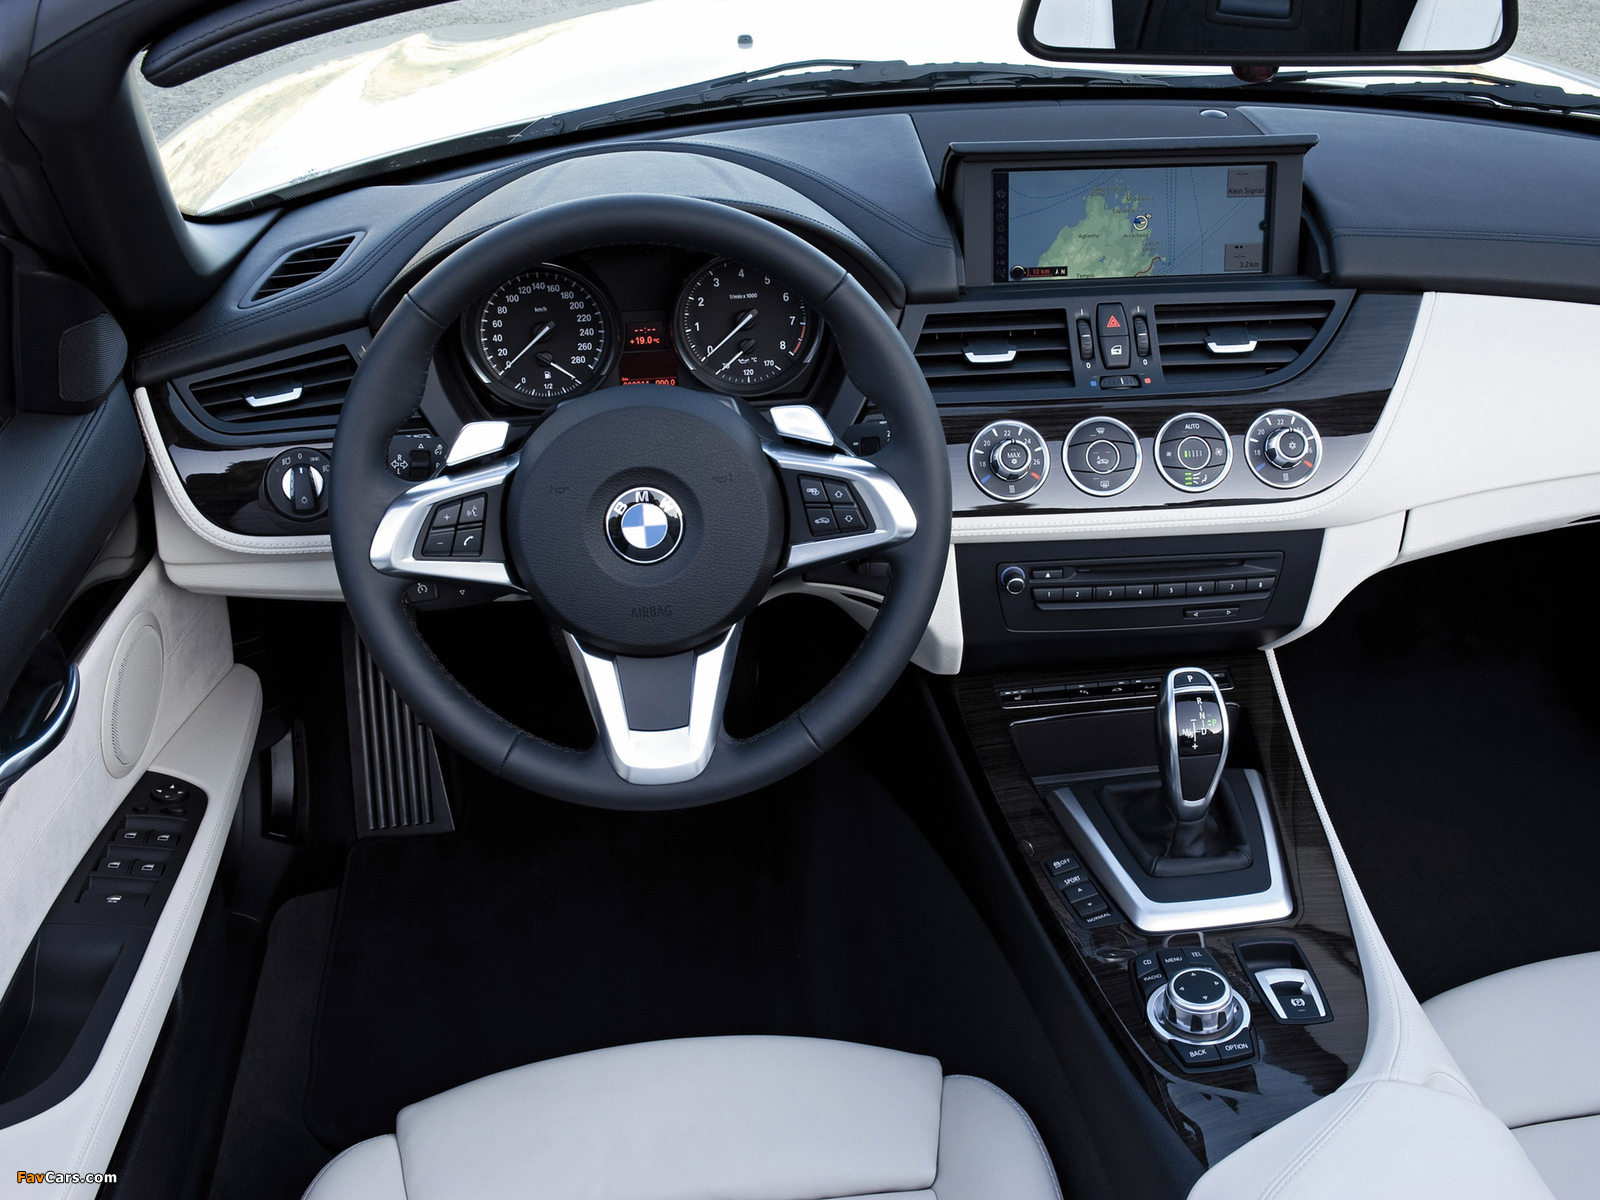 BMW Z4 sDrive35i Roadster (E89) 2009 pictures (1600 x 1200)